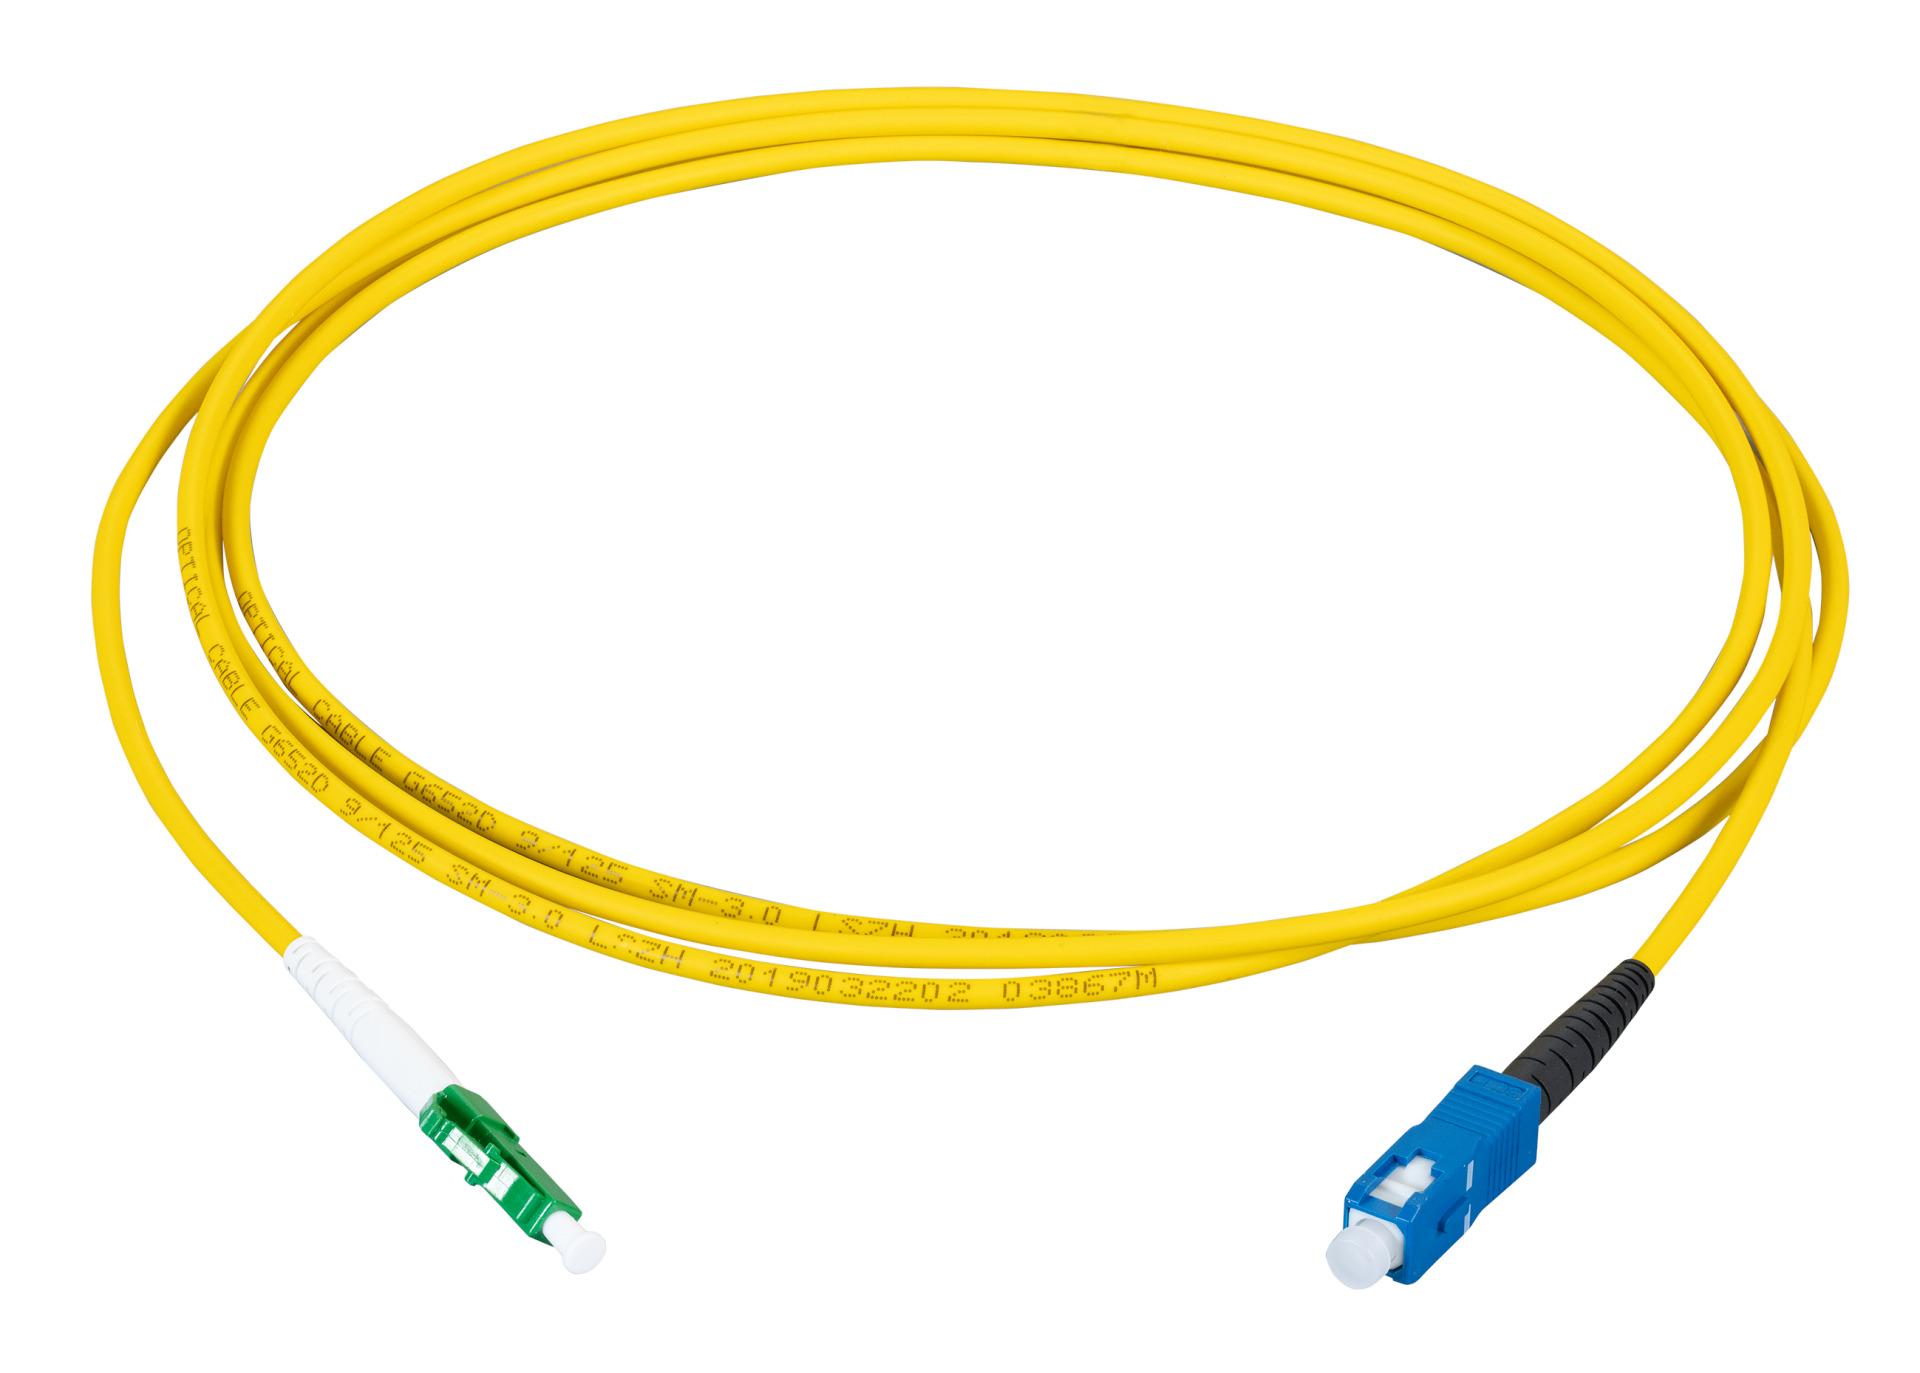 Simplex FO Patch Cable LC/APC-SC G657.A2 3m 3,0mm yellow 9/125µm